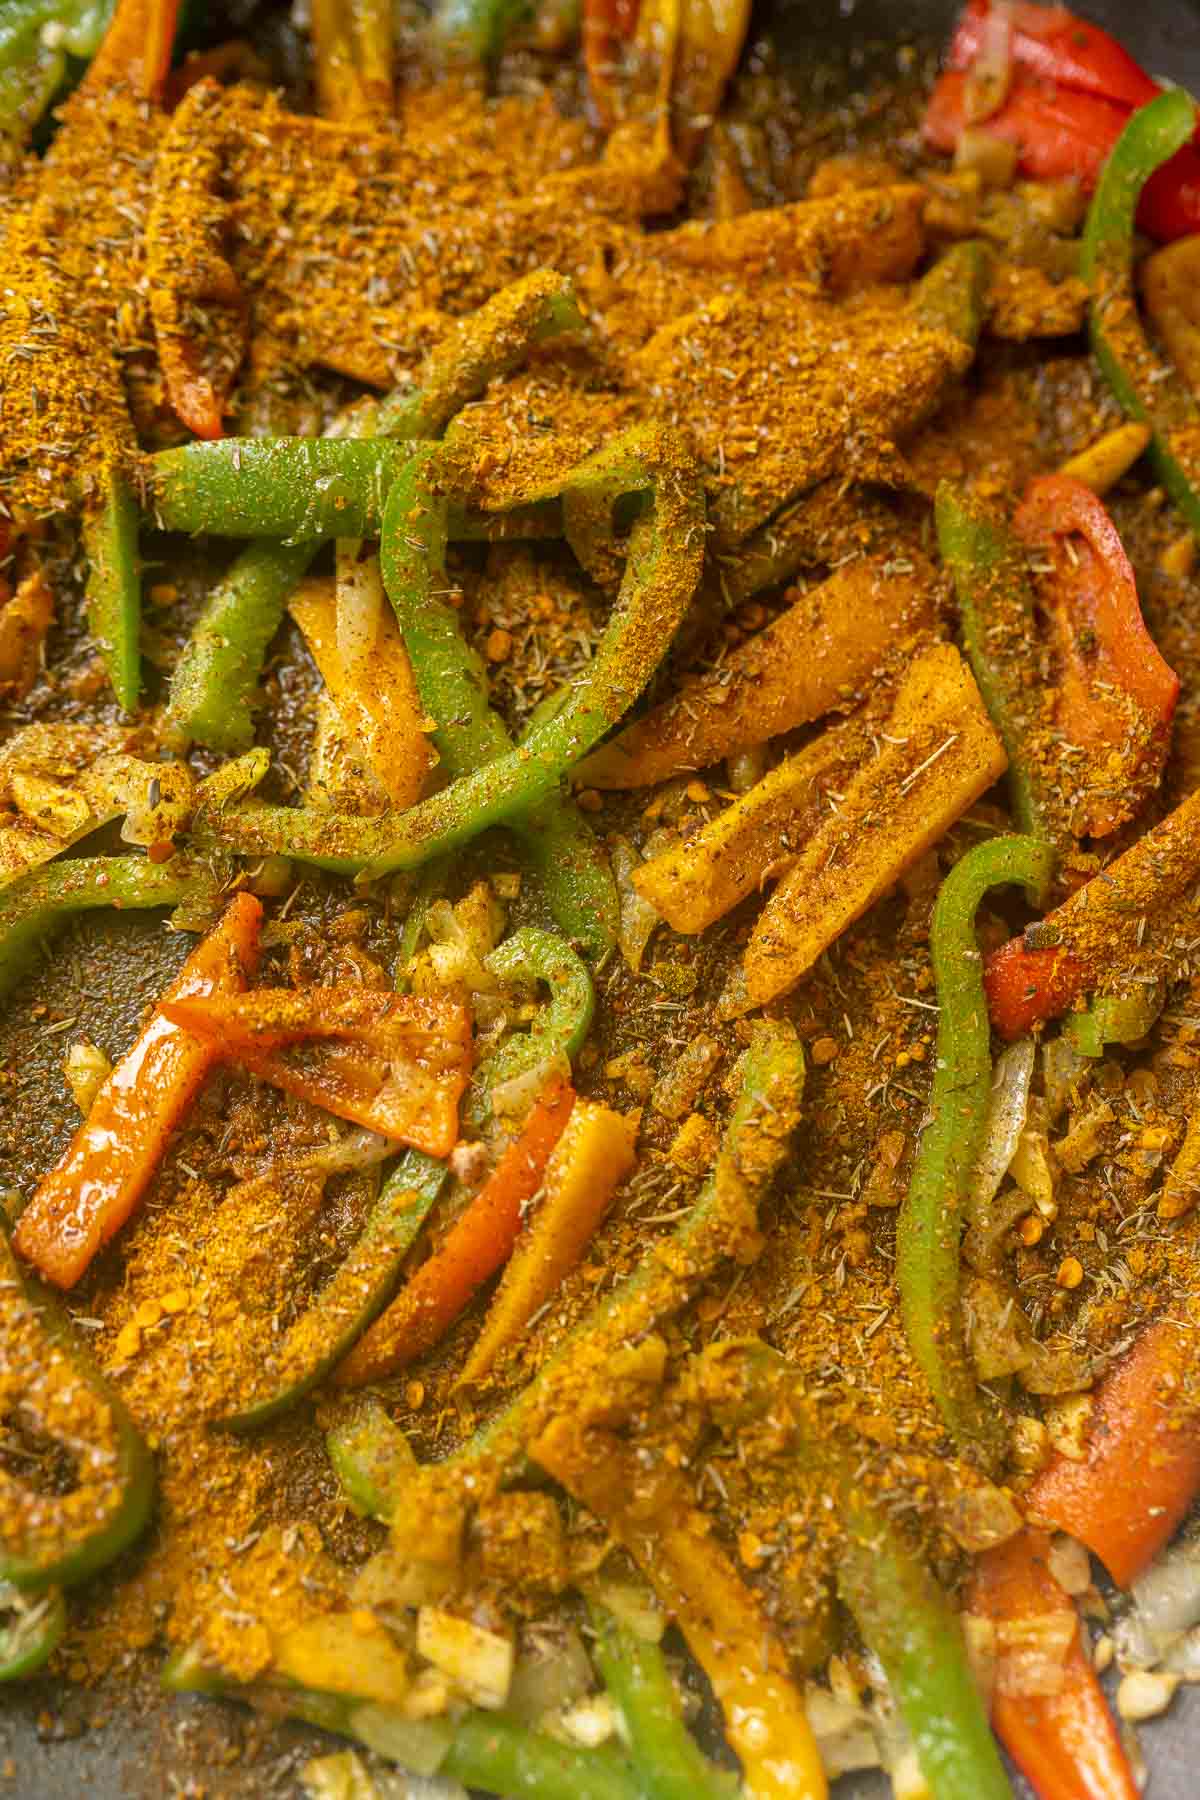 Veggies being sautéed in a pan with spices.